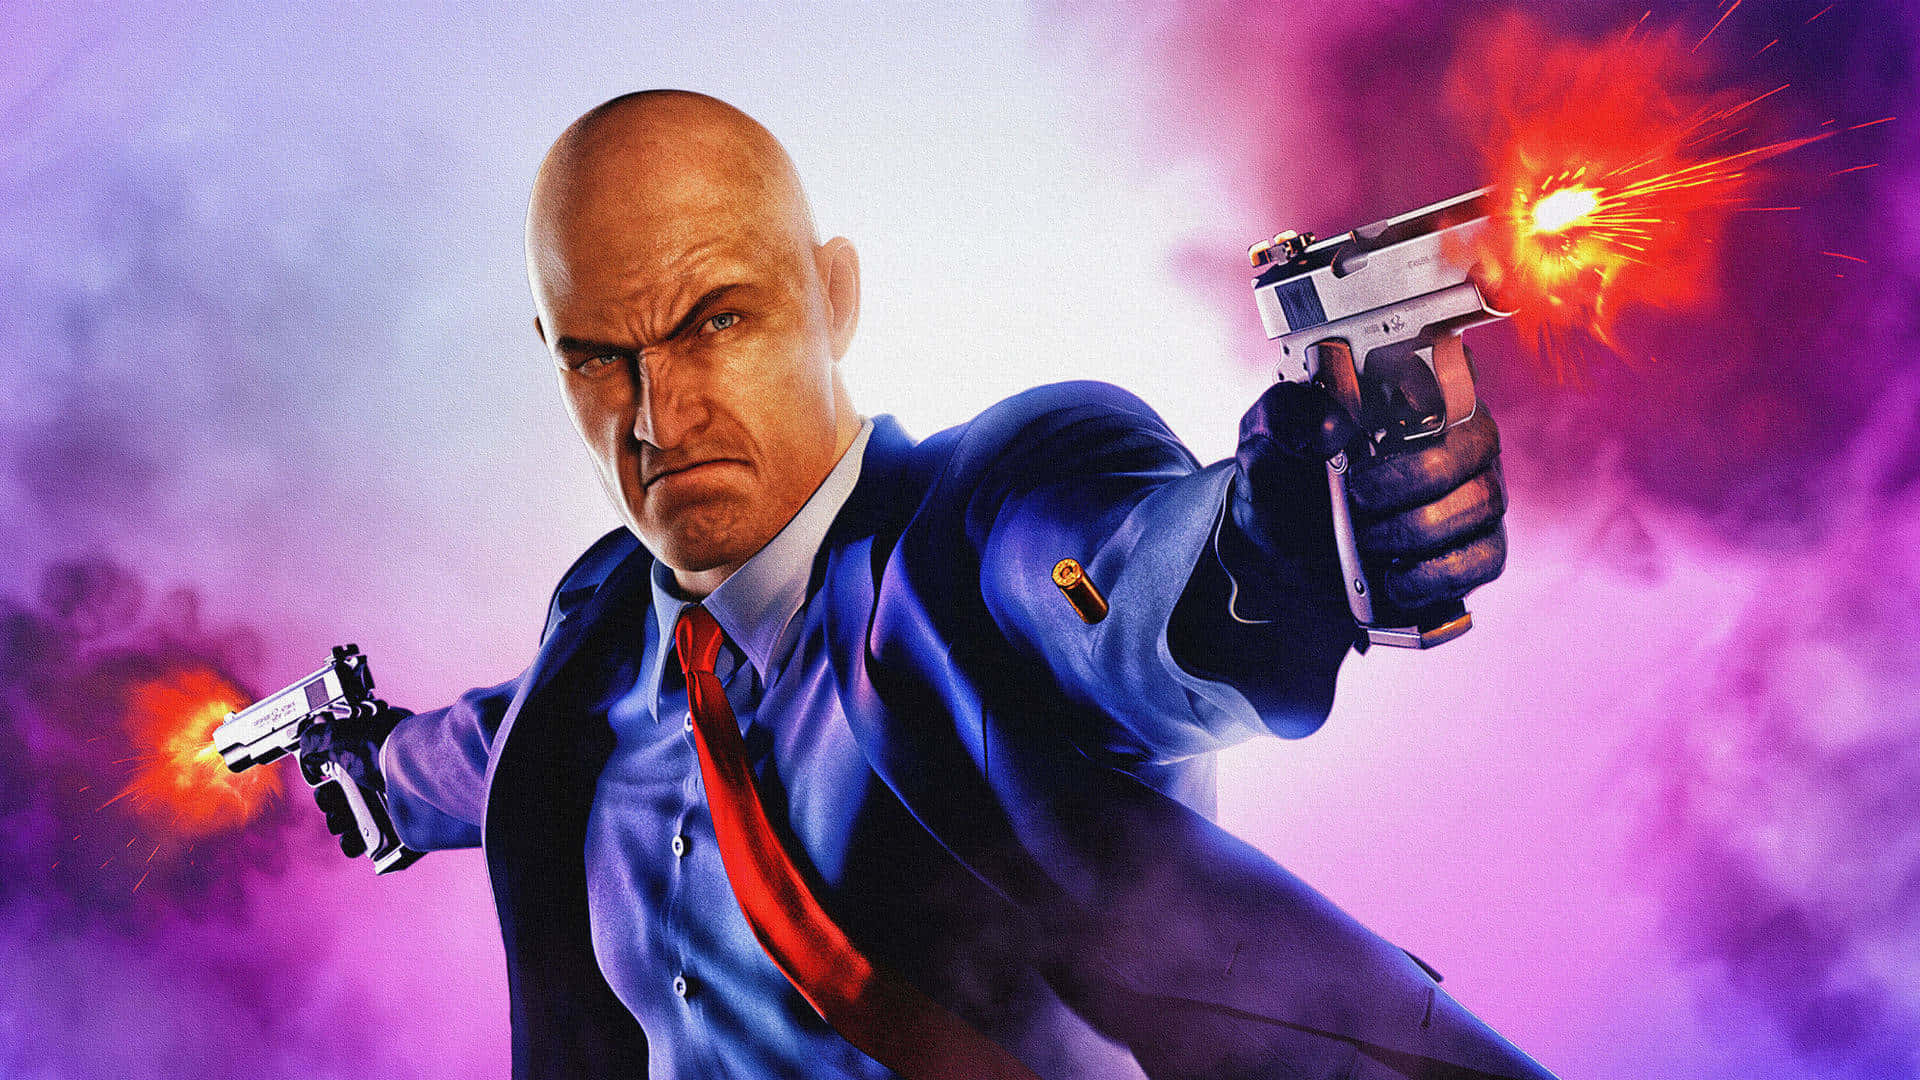 Go Back to School In Style with Hitman 2